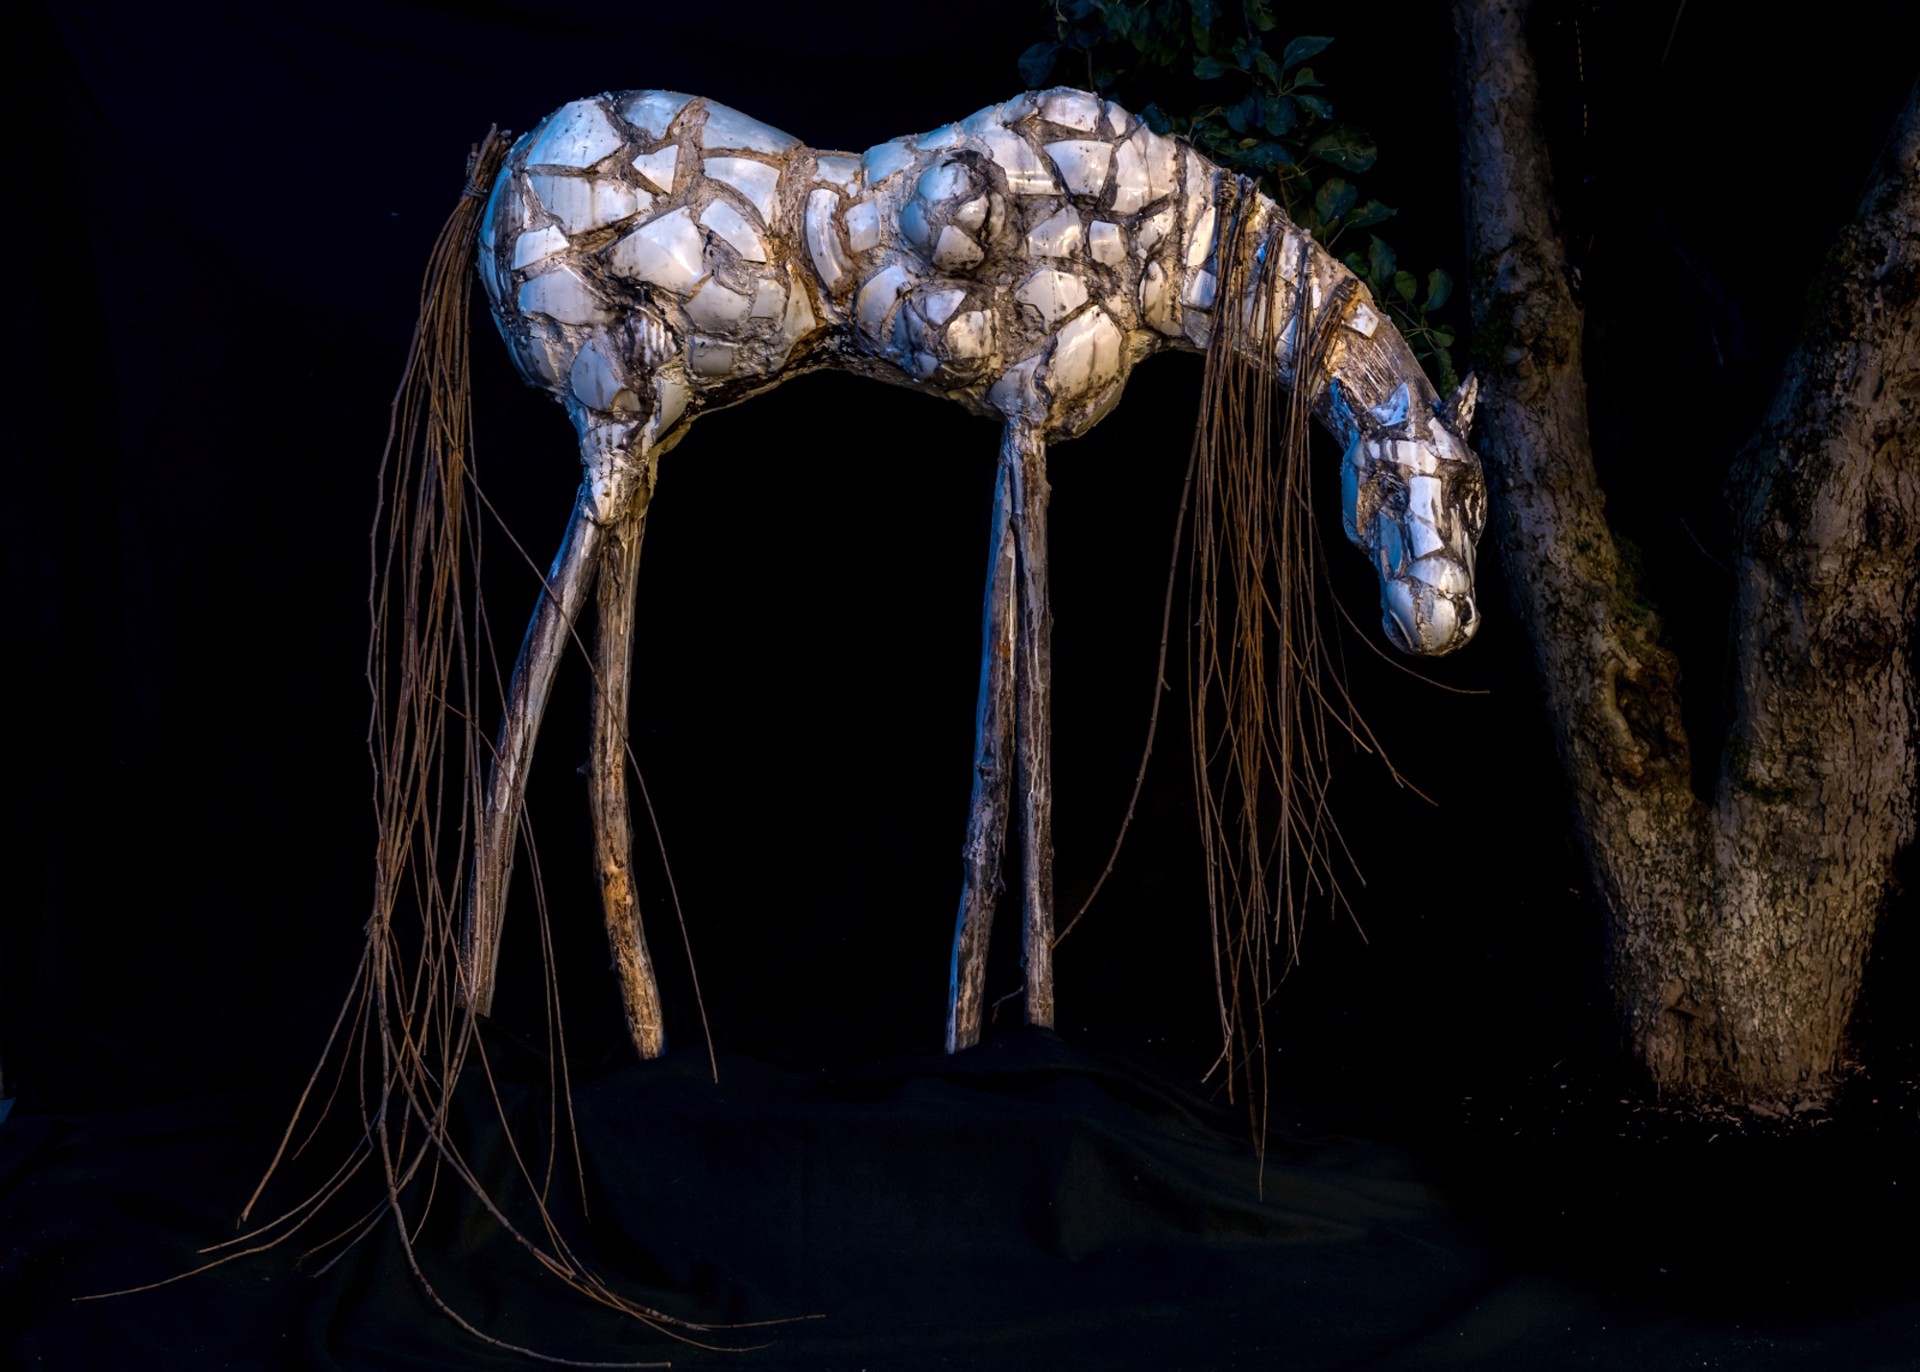 Lady Horse by Alla Goniodsky